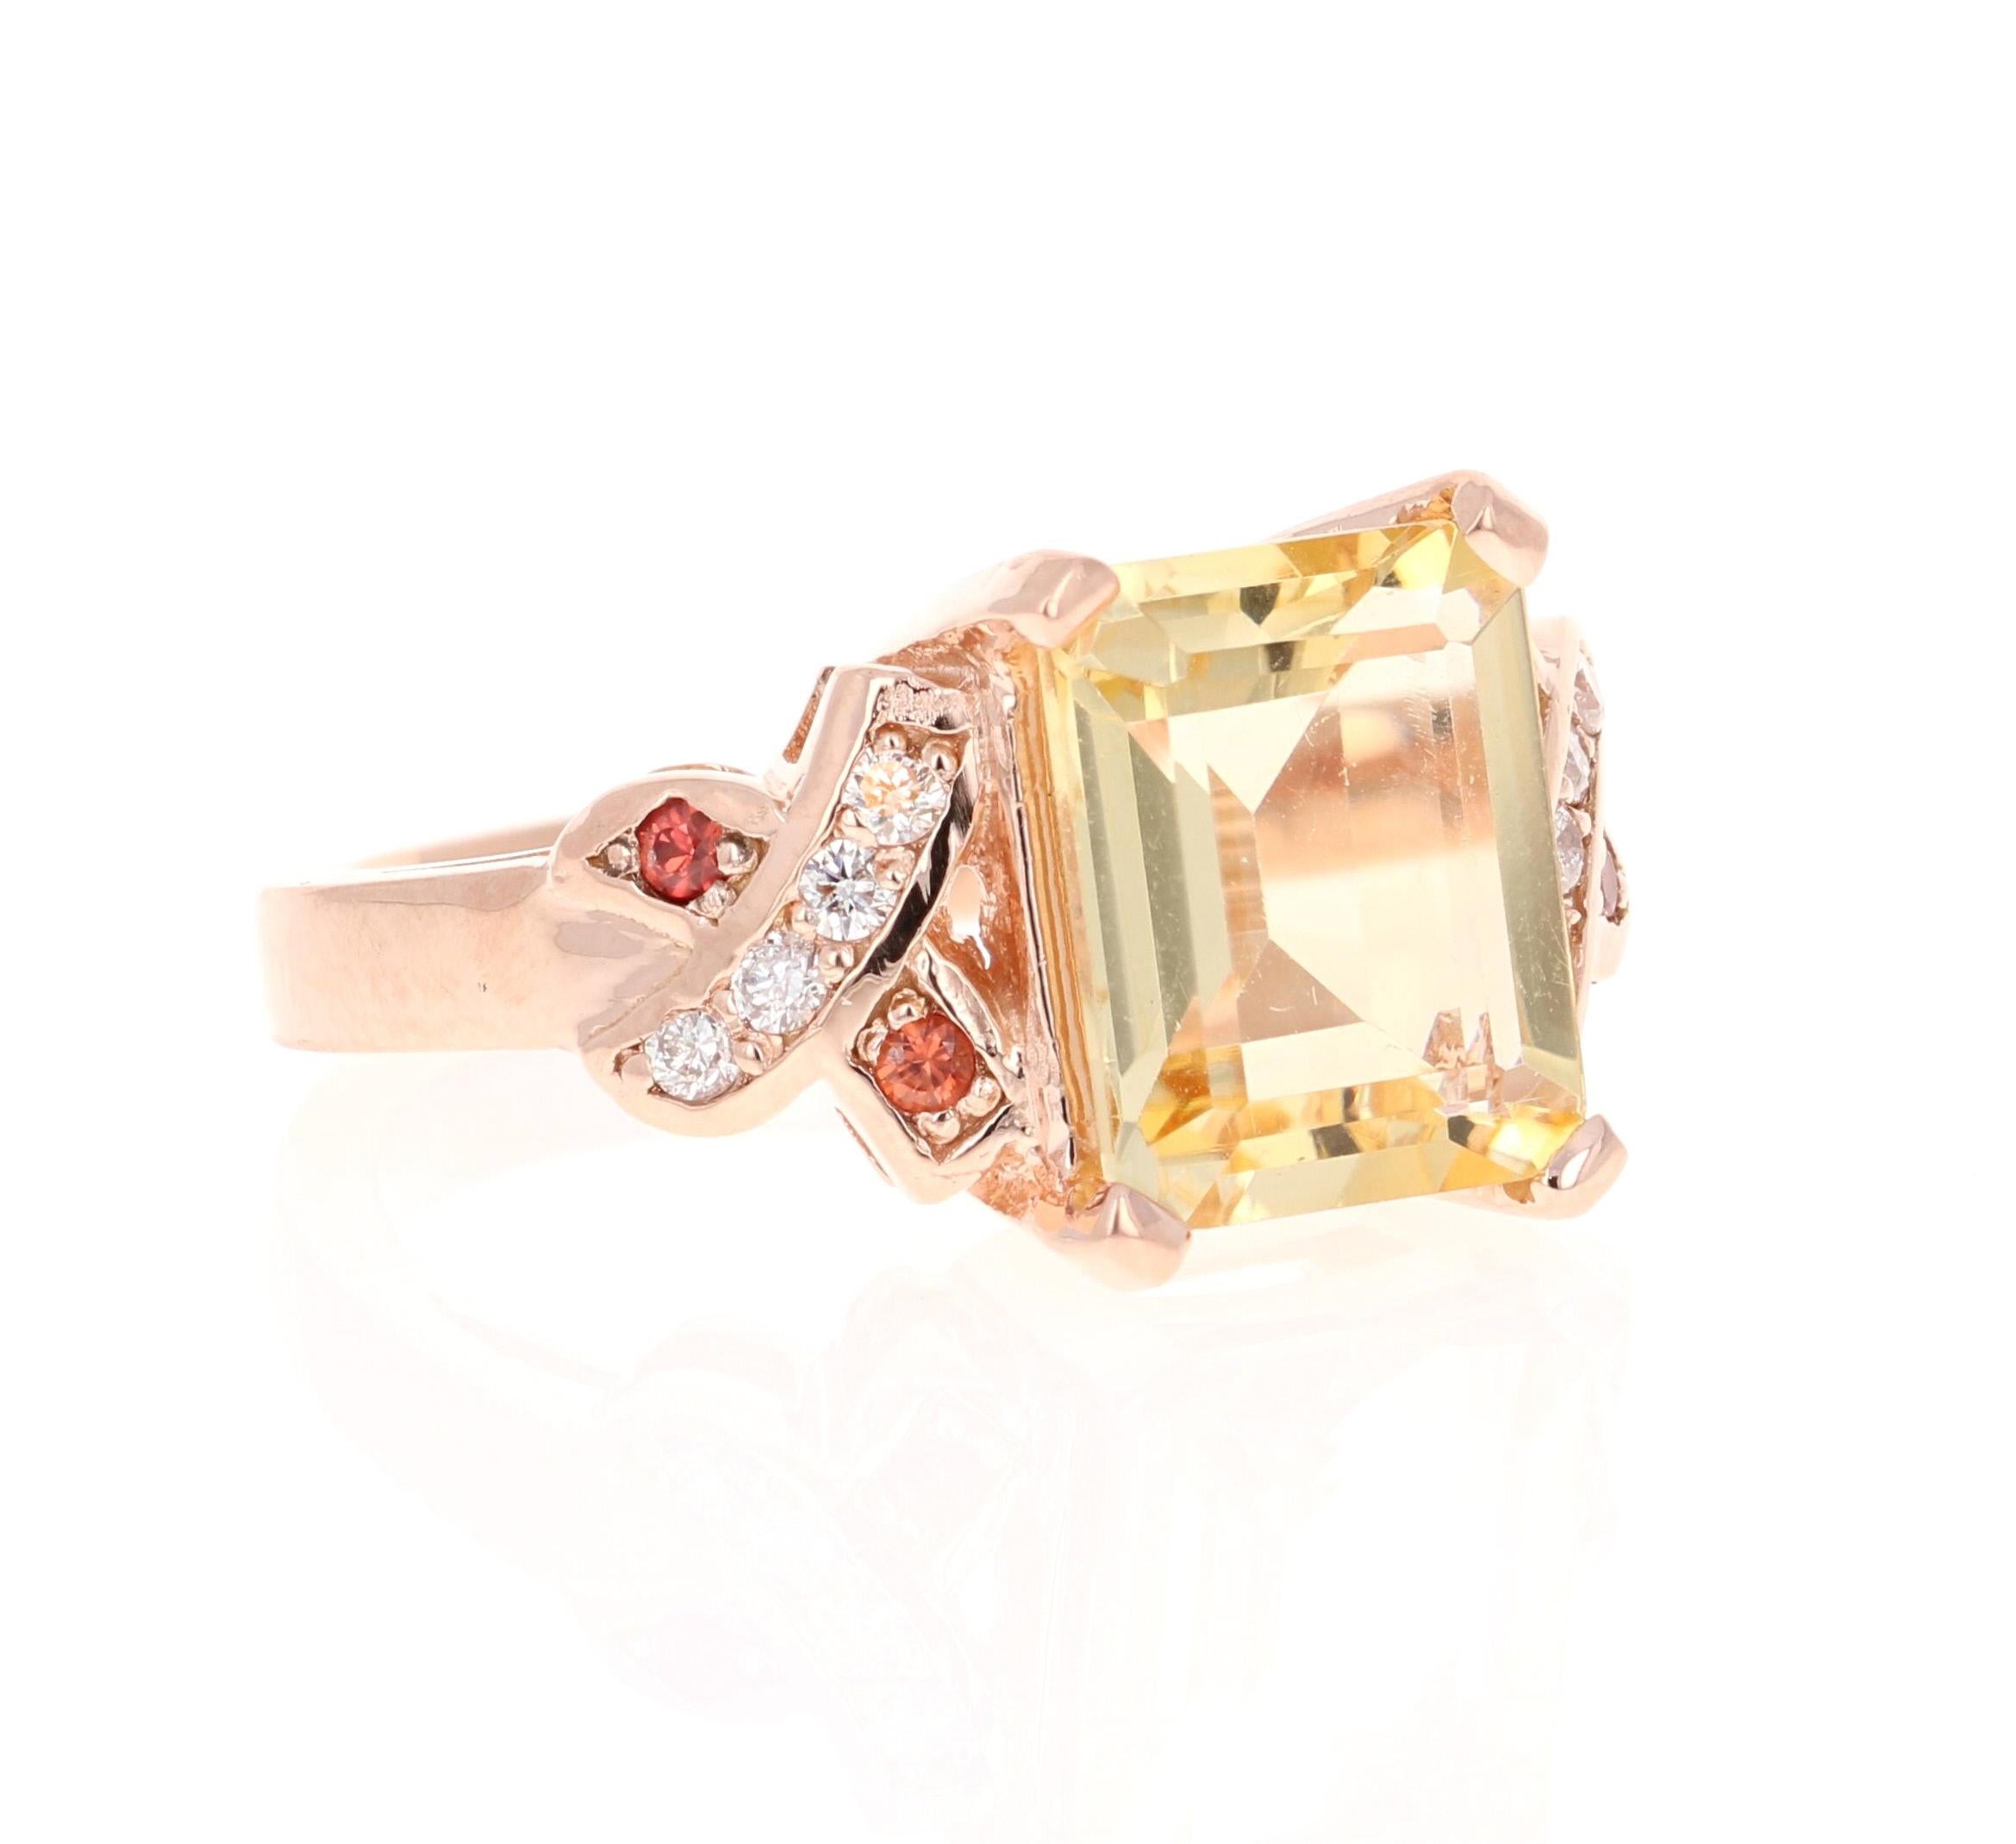 3.93 Carat Citrine Sapphire Diamond Rose Gold Bridal Ring

This gorgeous ring has a beautiful Emerald Cut Citrine Quartz weighing 3.63 Carats and is surrounded by 4 Round Cut Orange Sapphires weighing 0.13 Carats and 8 Round Cut Diamonds weighing